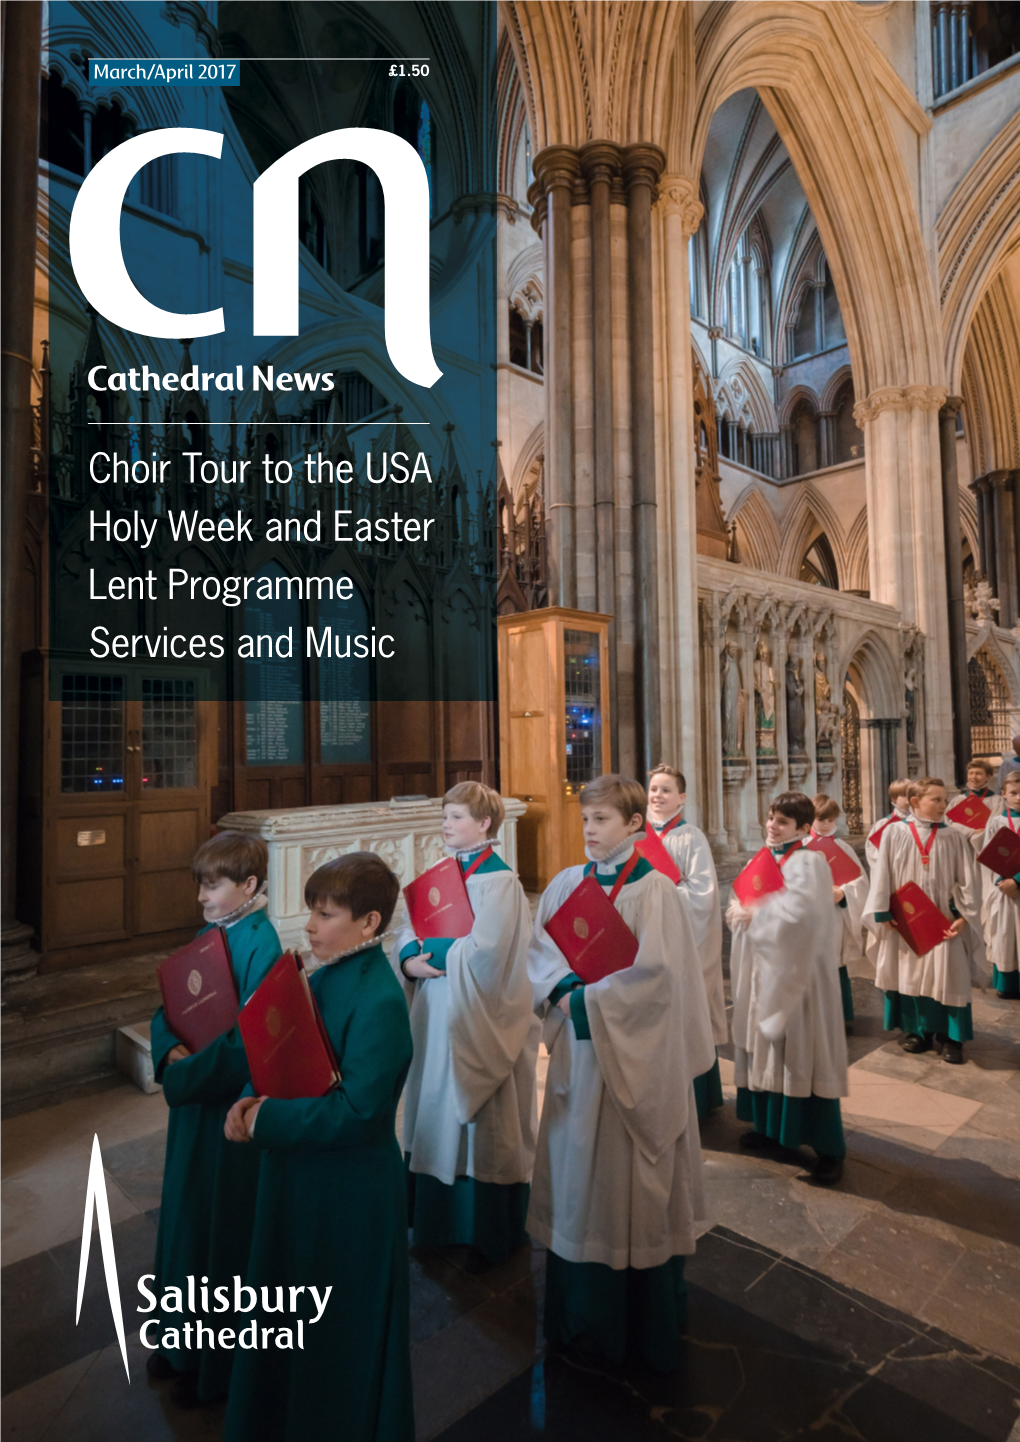 Choir Tour to the USA Holy Week and Easter Lent Programme Services and Music